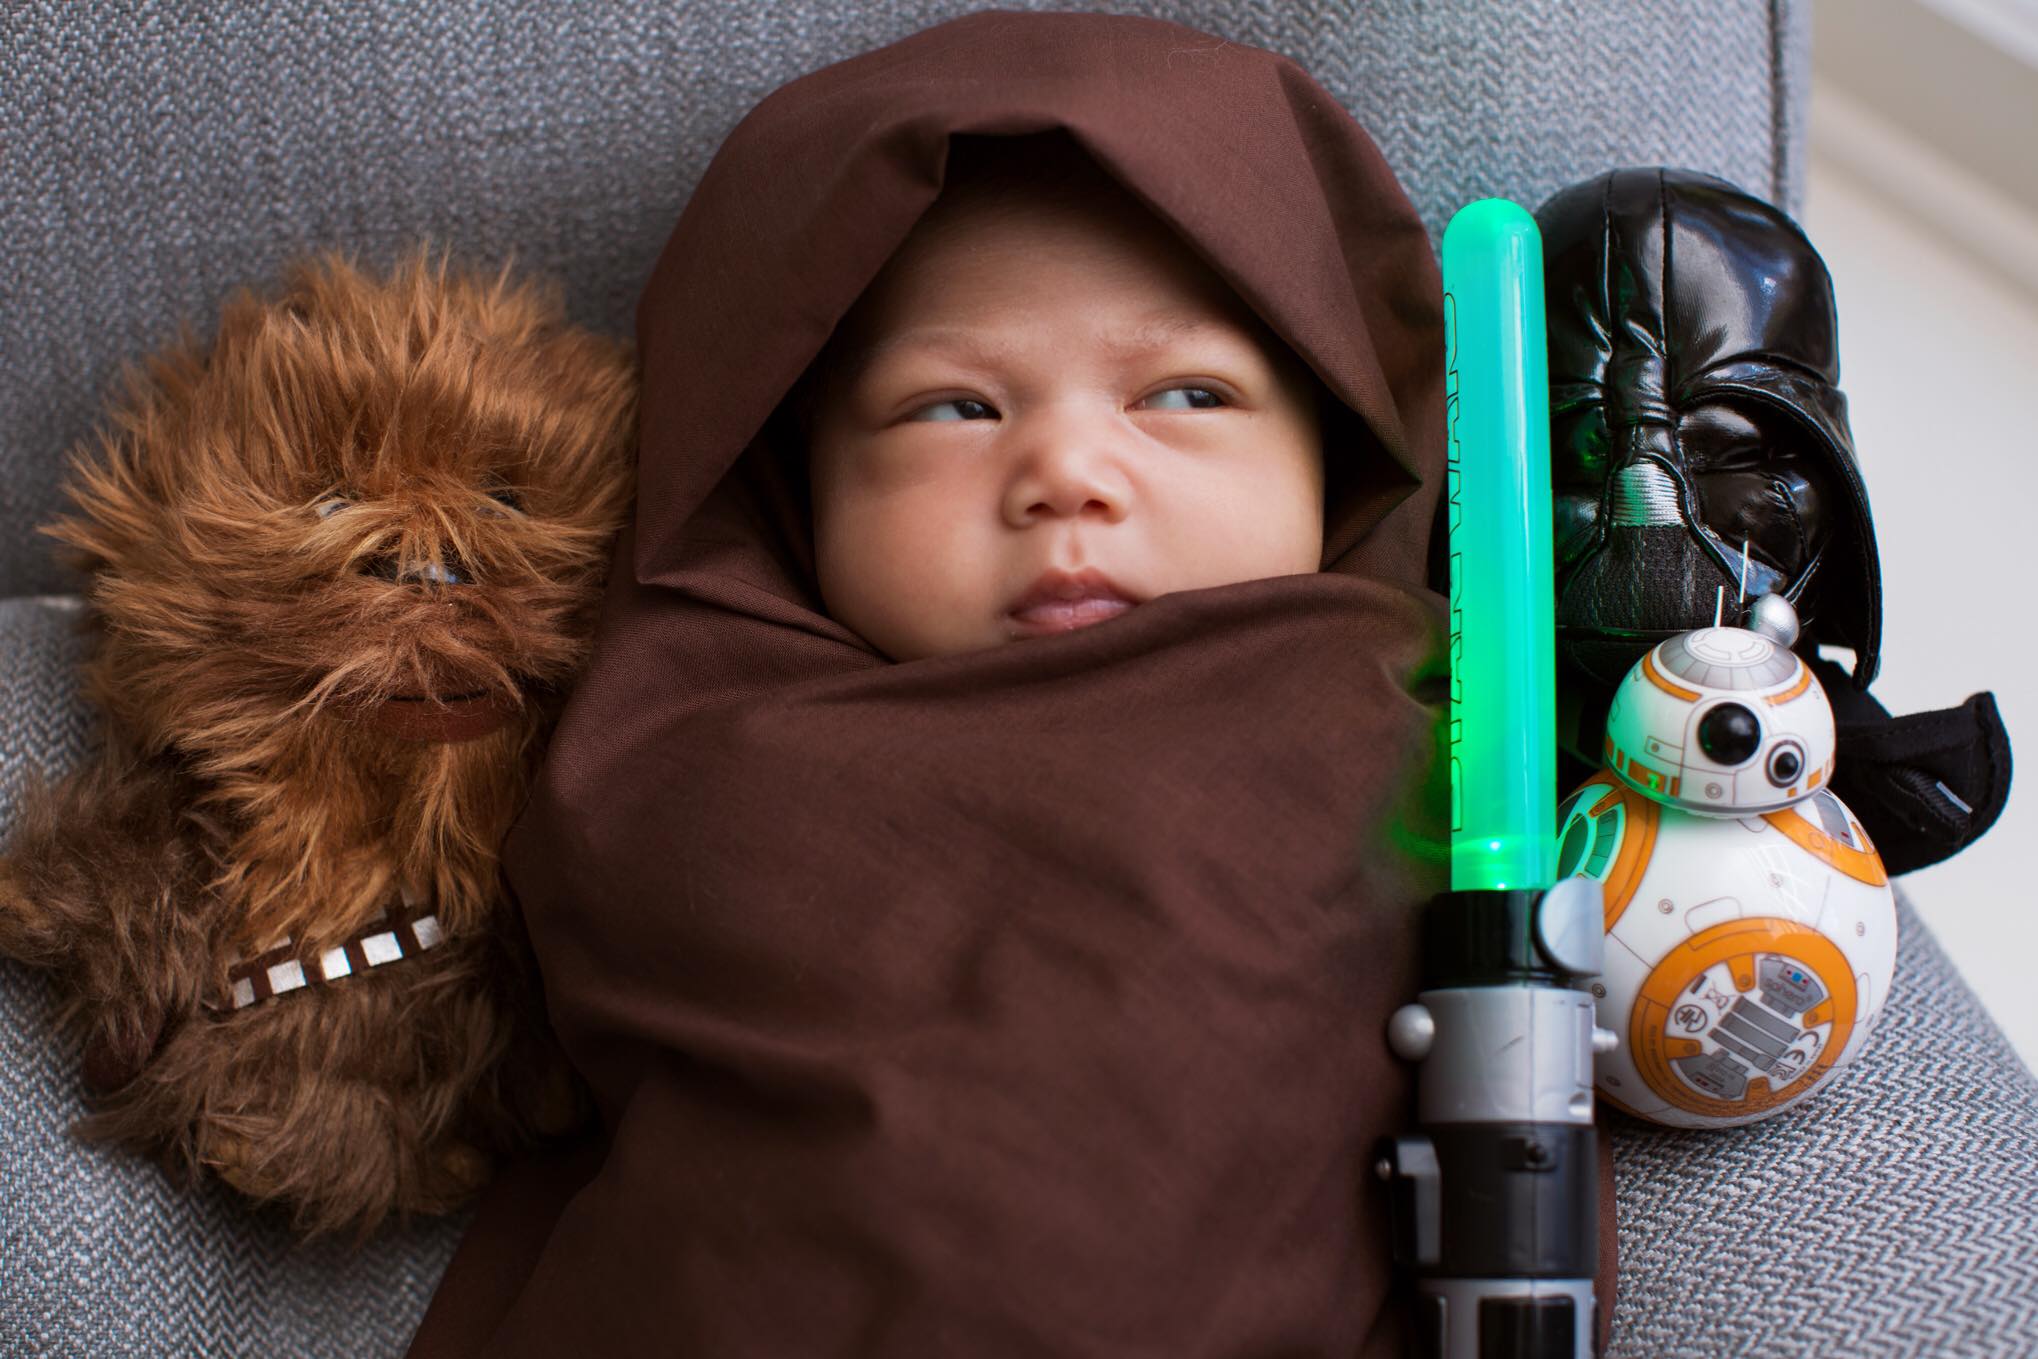 PHOTO: A photo of Mark Zuckerberg's daughter, Max, was posted to his Facebook on Dec. 17, 2015 with the caption, "The force is strong with this one."